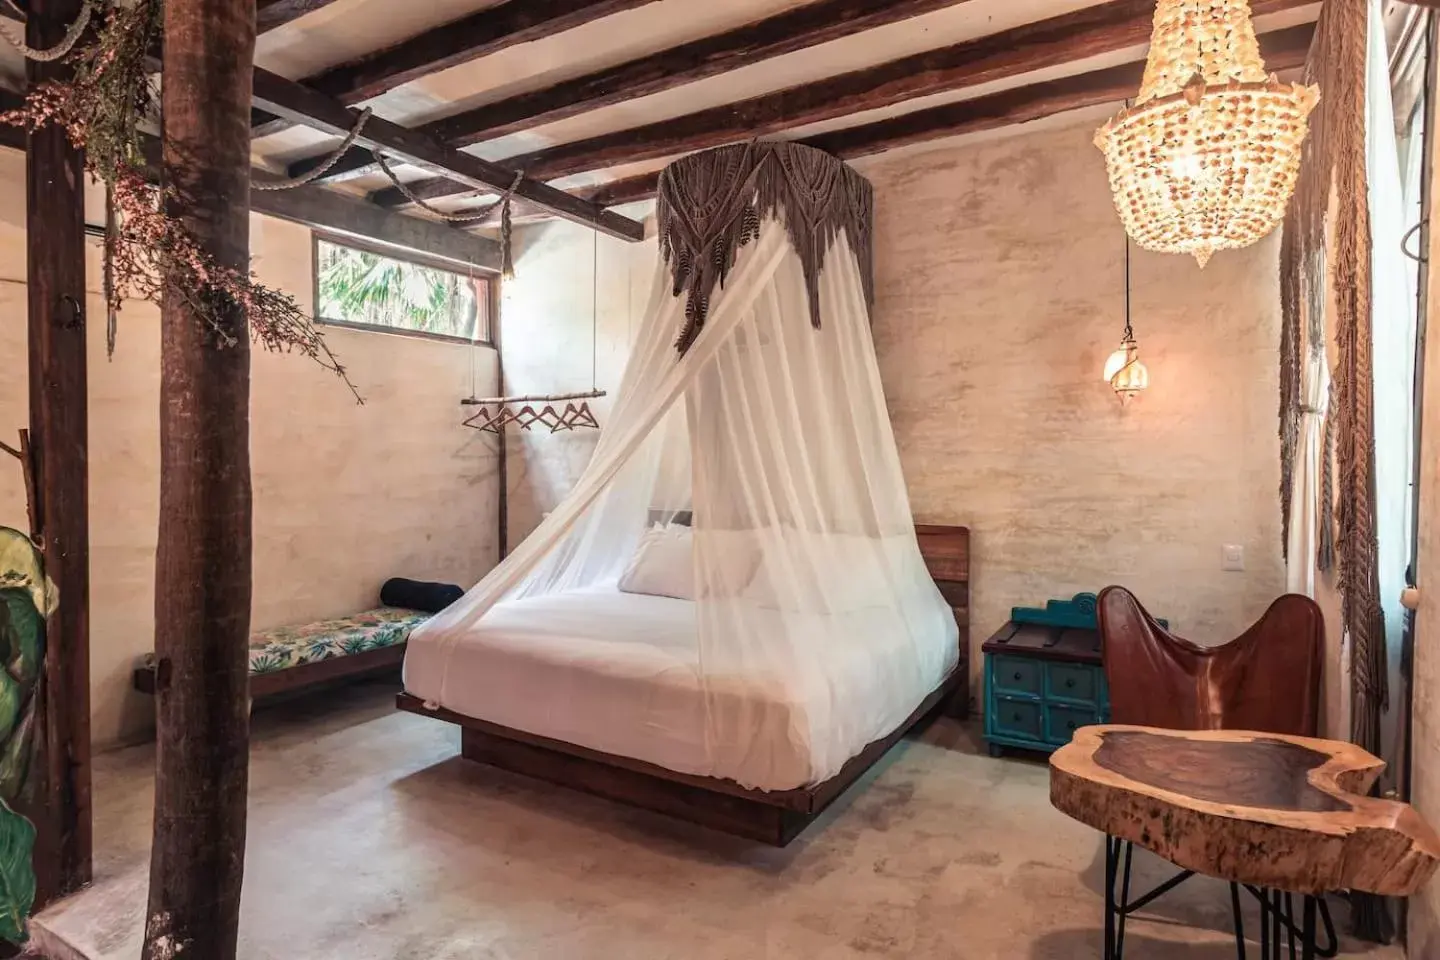 Bed in Hidden Treehouse Tulum Eco-Hotel